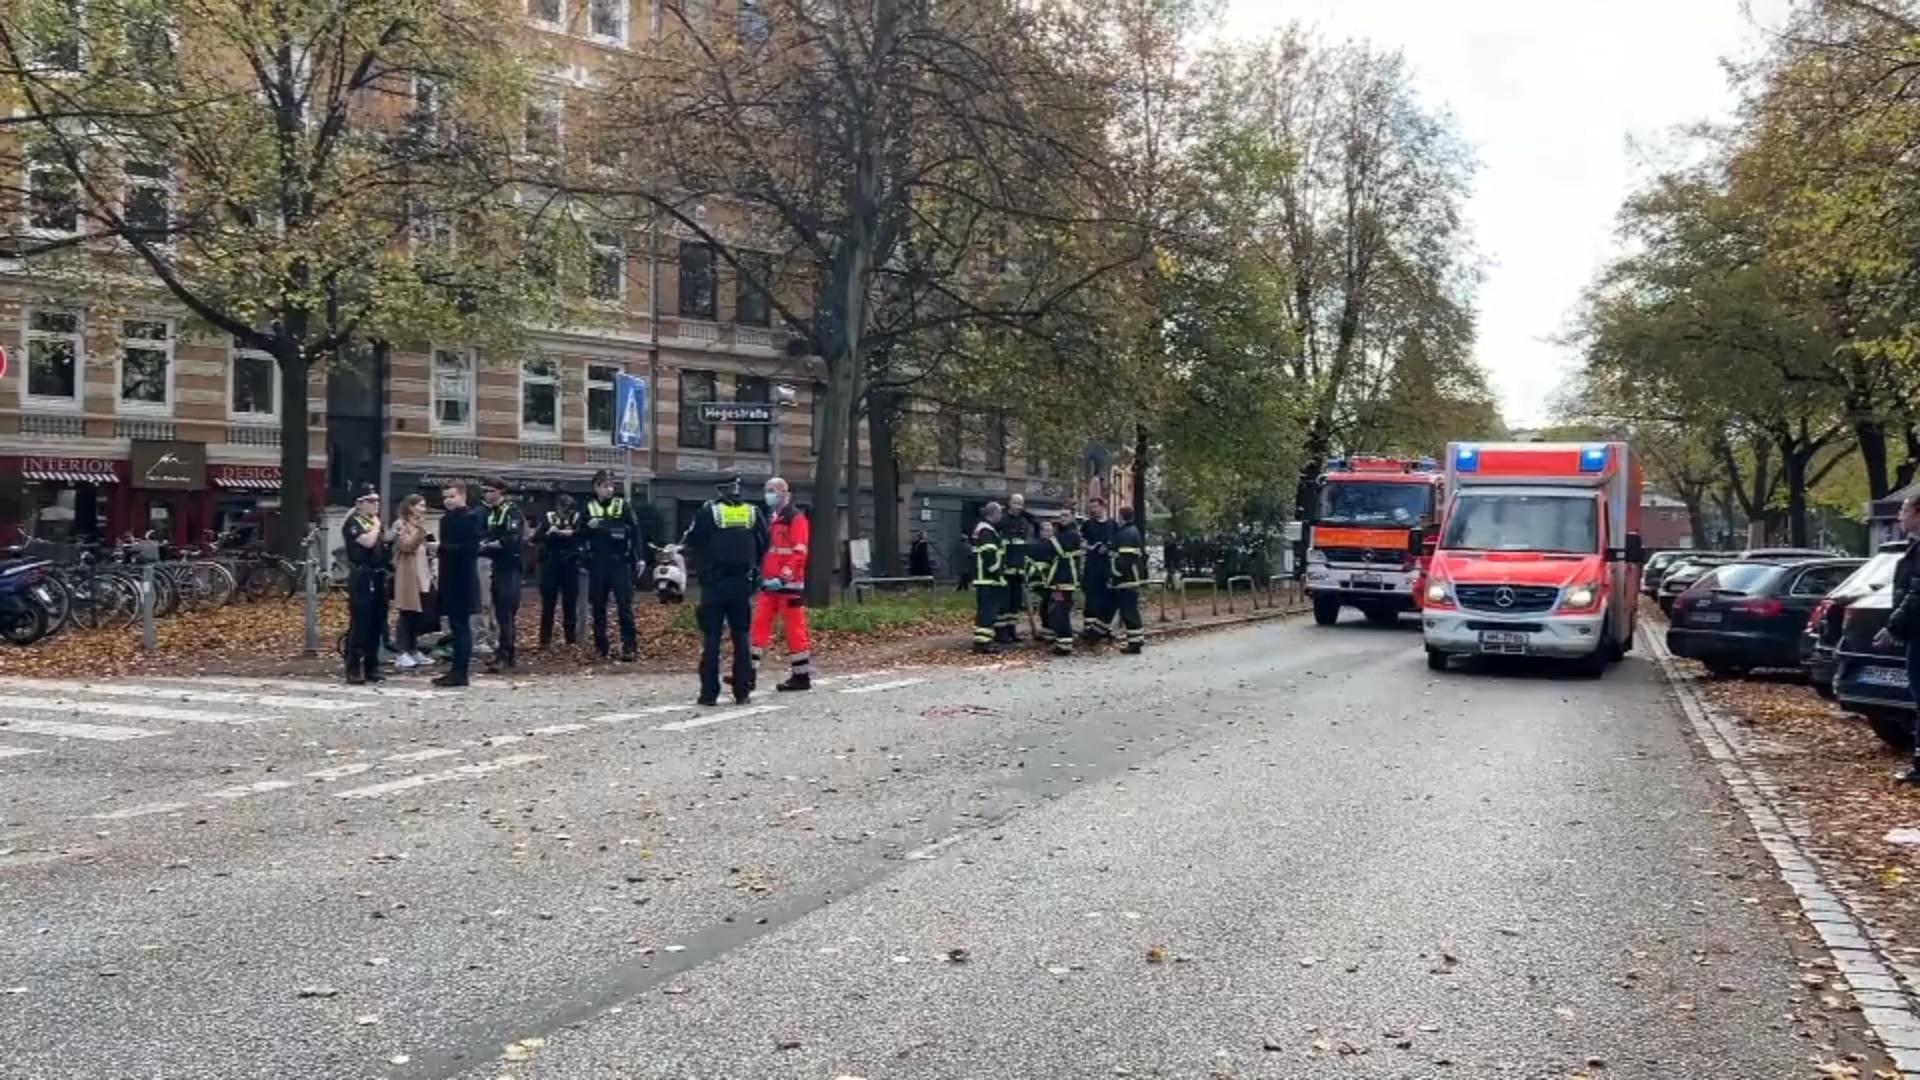 The truck driver in Hamburg went on to hit a woman